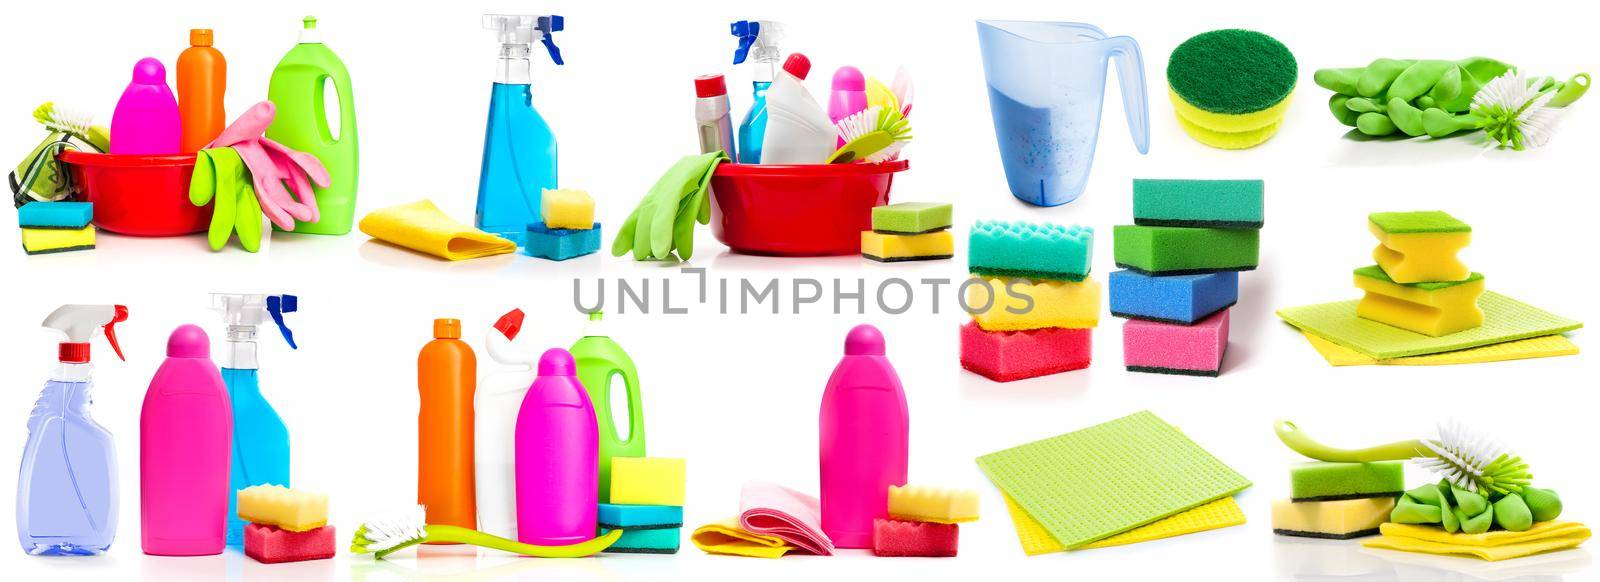 Collage of cleaning detergent and supplies photos isolated on a white background